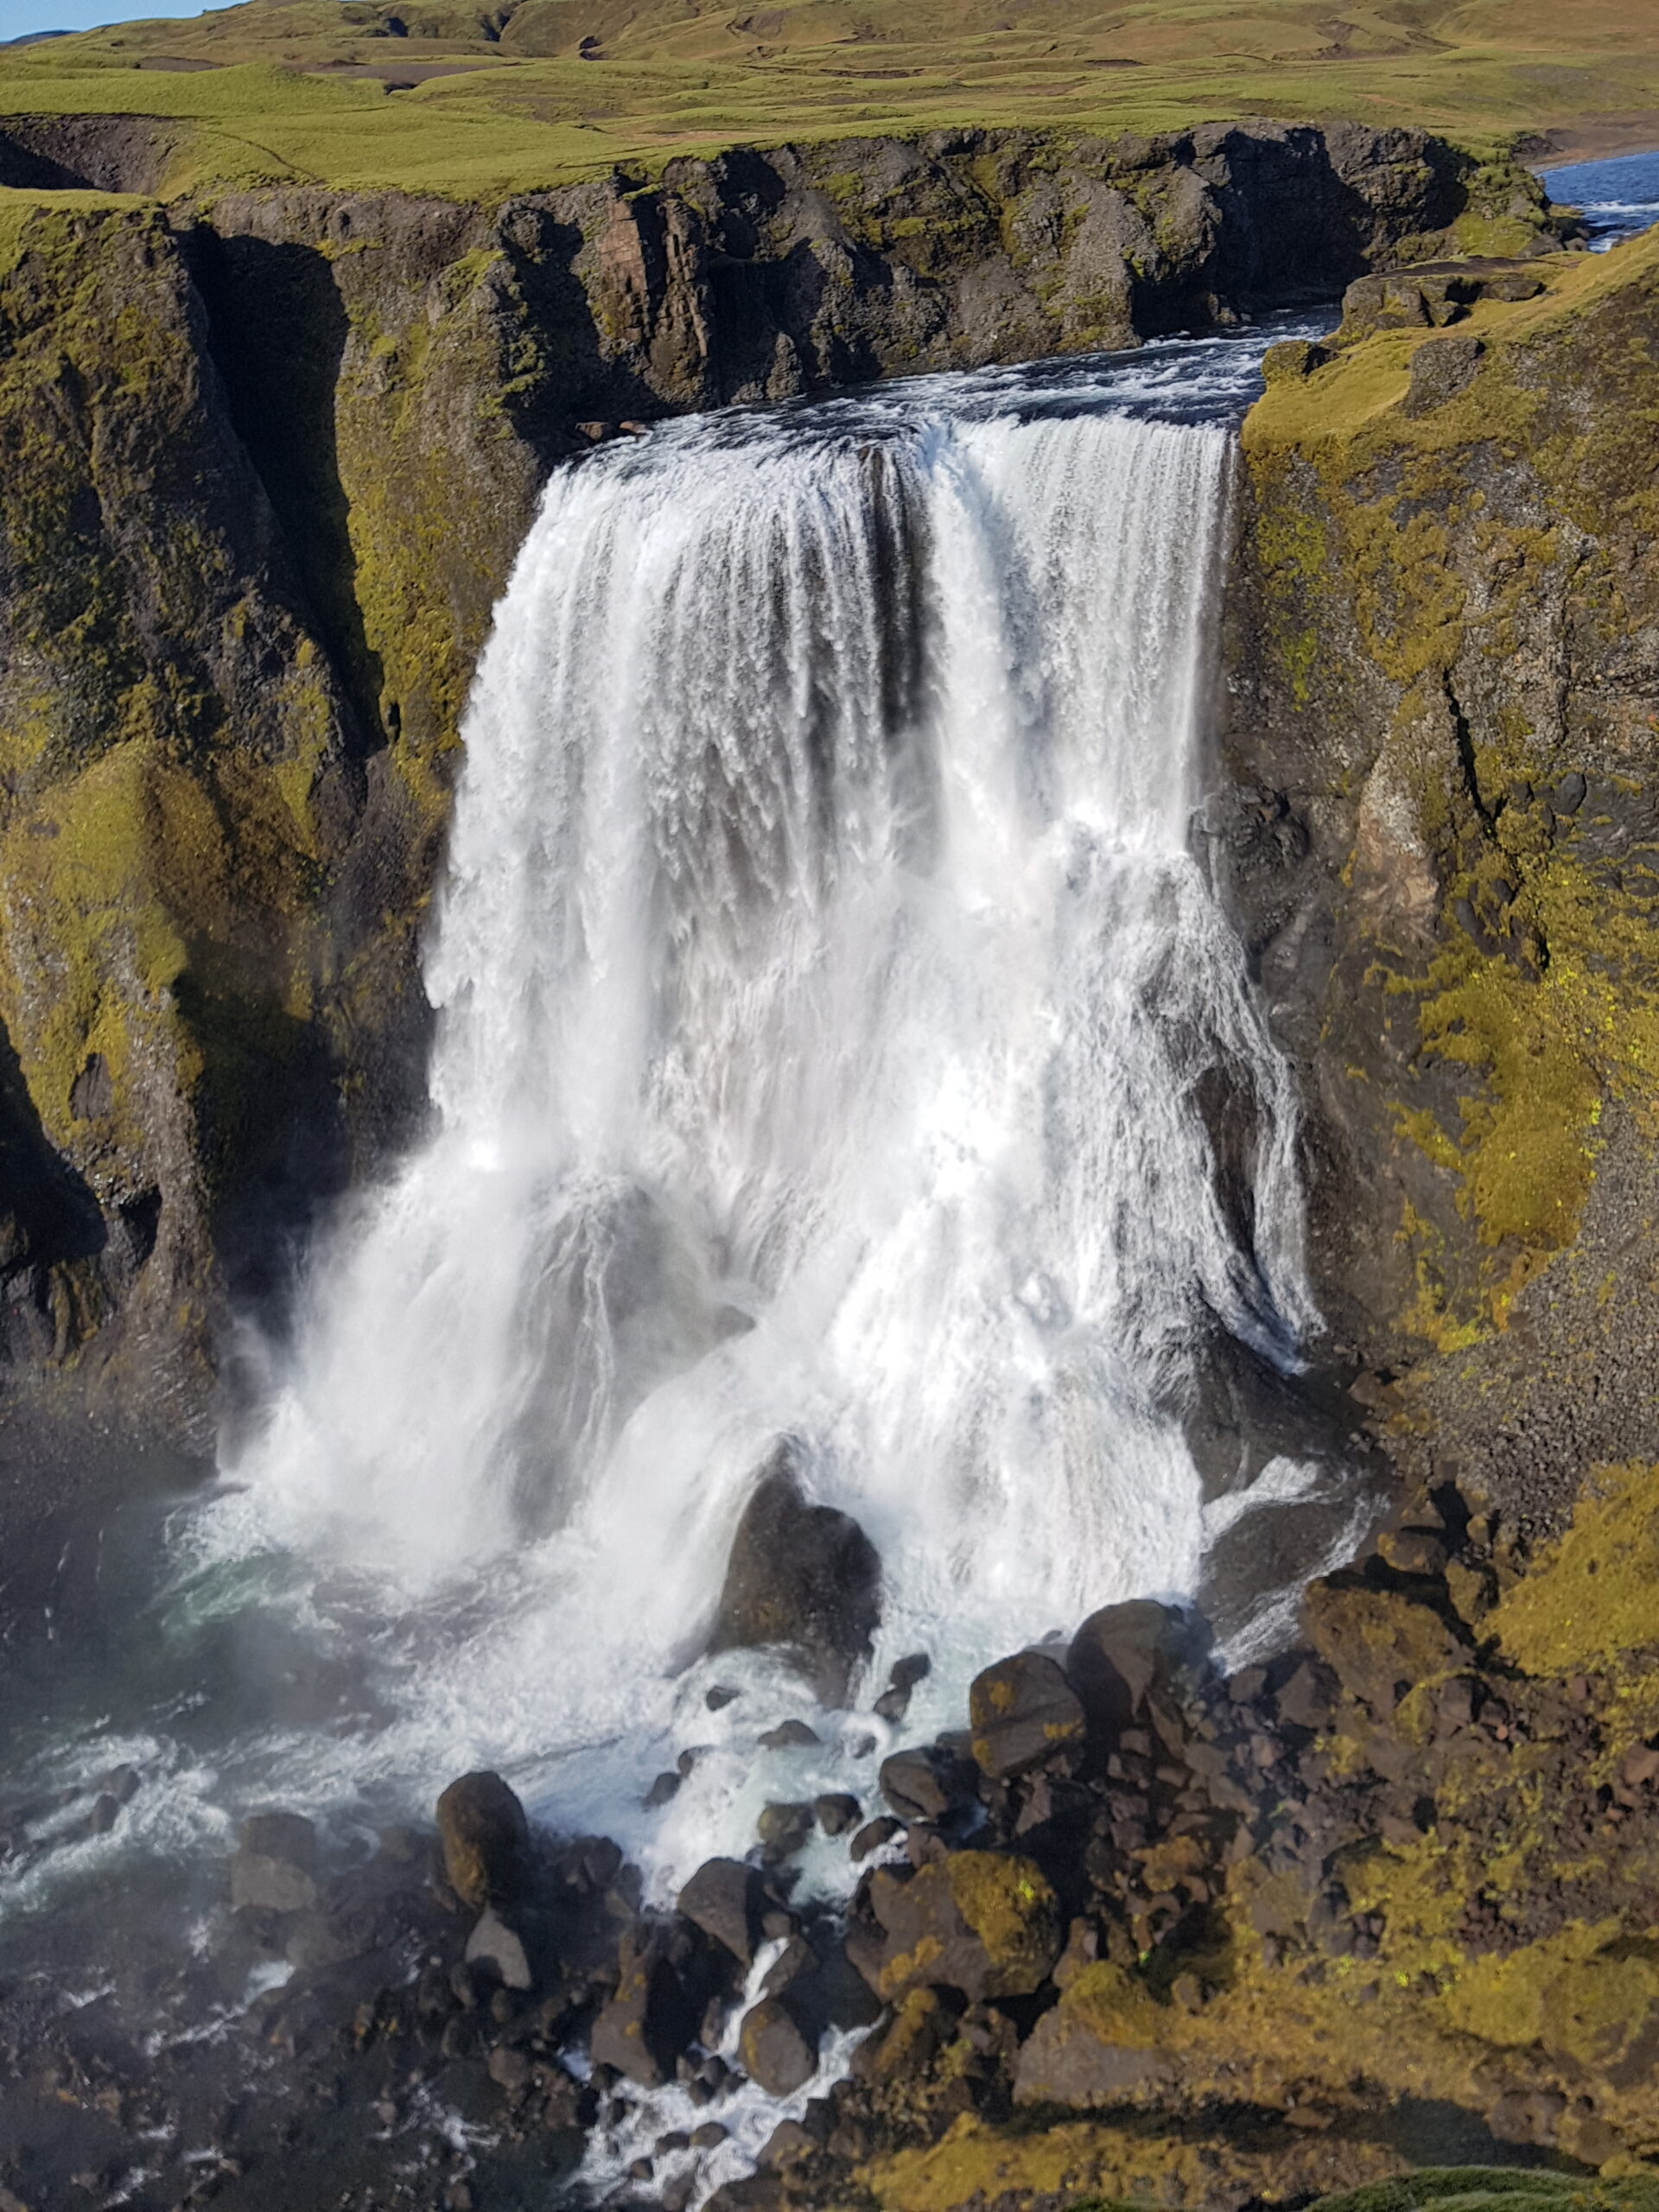 The waterfall Fagrifoss is on the way to Laki.